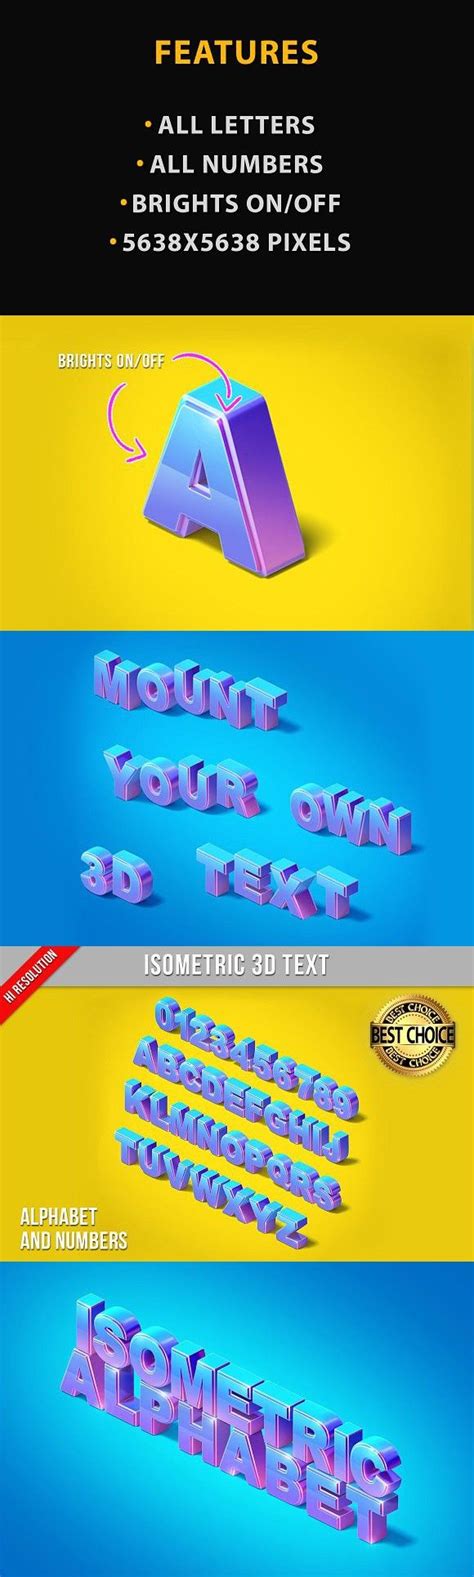 You will typically need to provide general financial information. Isometric 3D Text | Isometric, 3d text, Isometric design